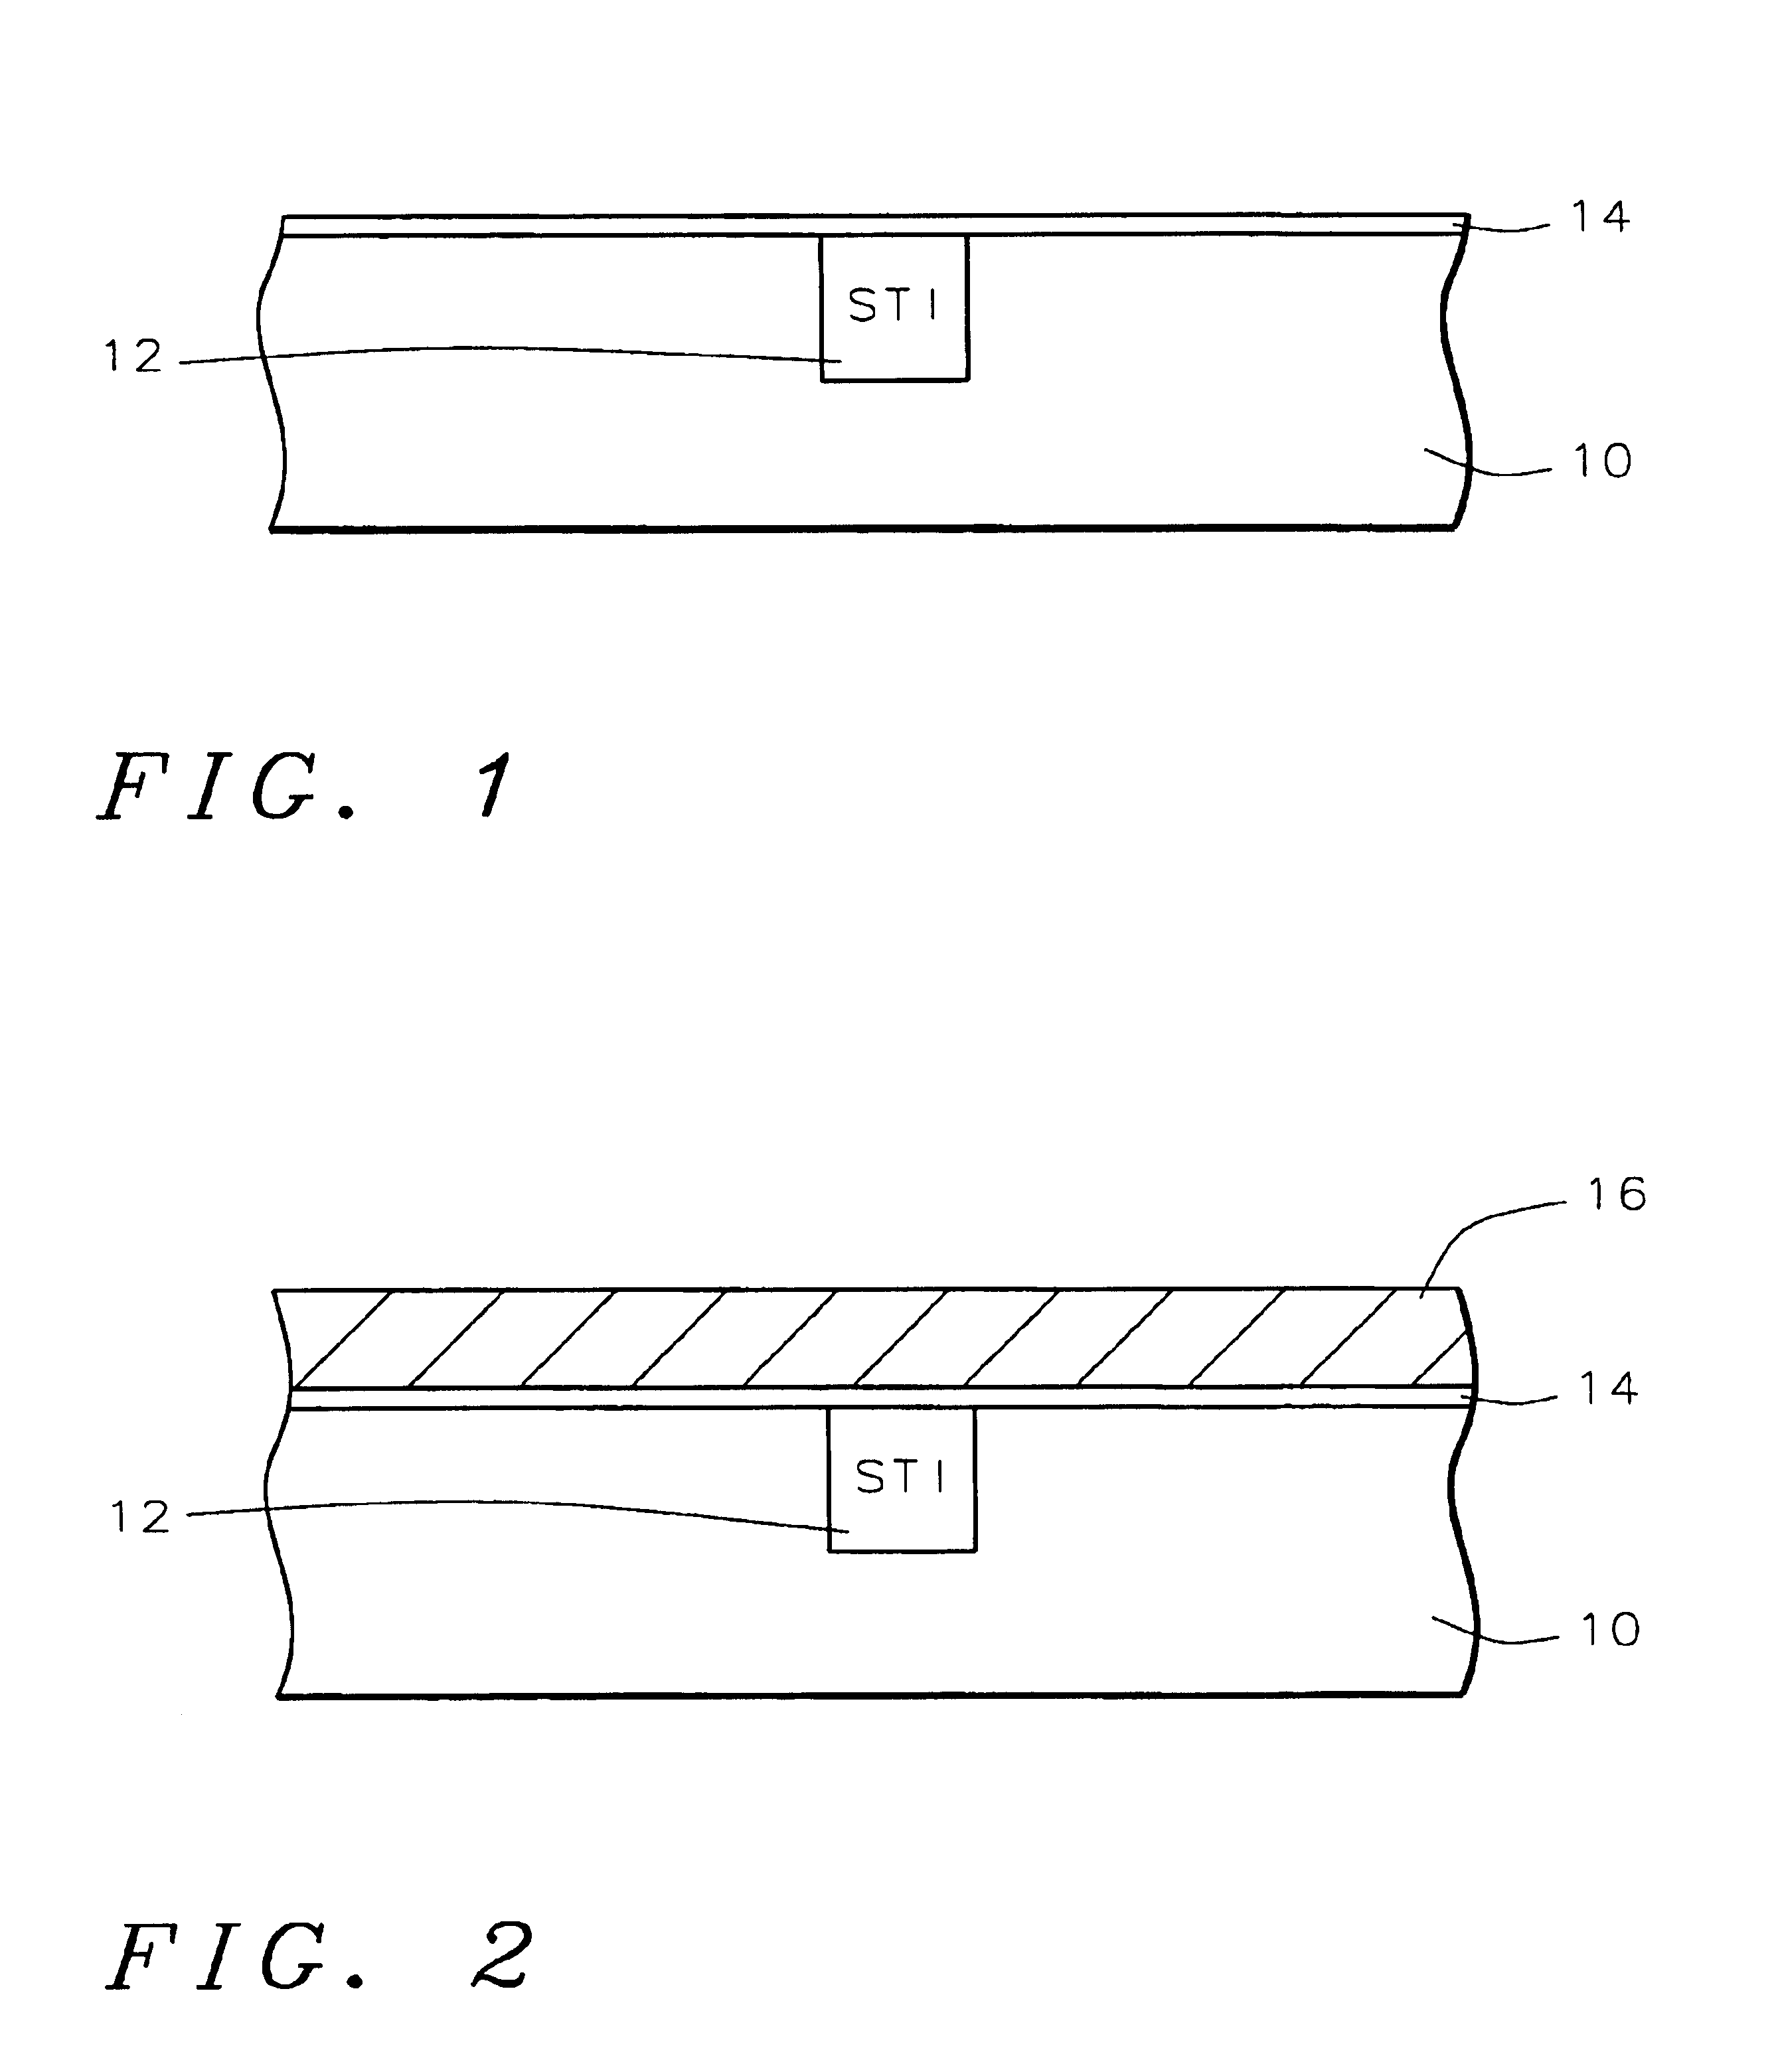 Methods to form dual metal gates by incorporating metals and their conductive oxides